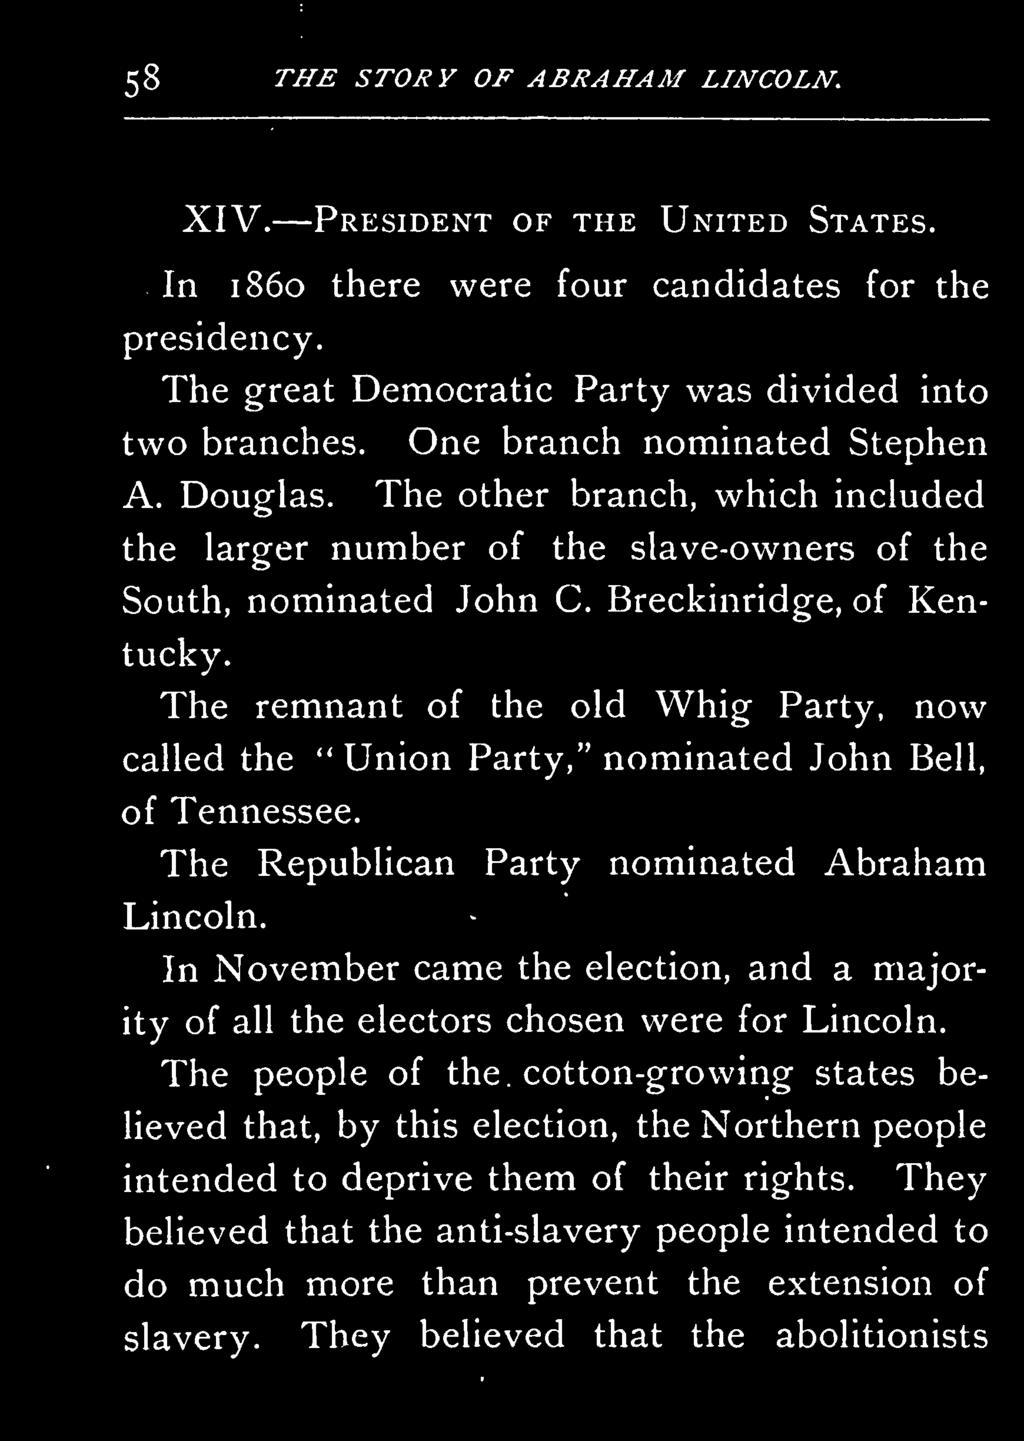 The Republican Party nominated Abraham Lincoln. In November came the election, and a majority of all the electors chosen were for Lincoln.